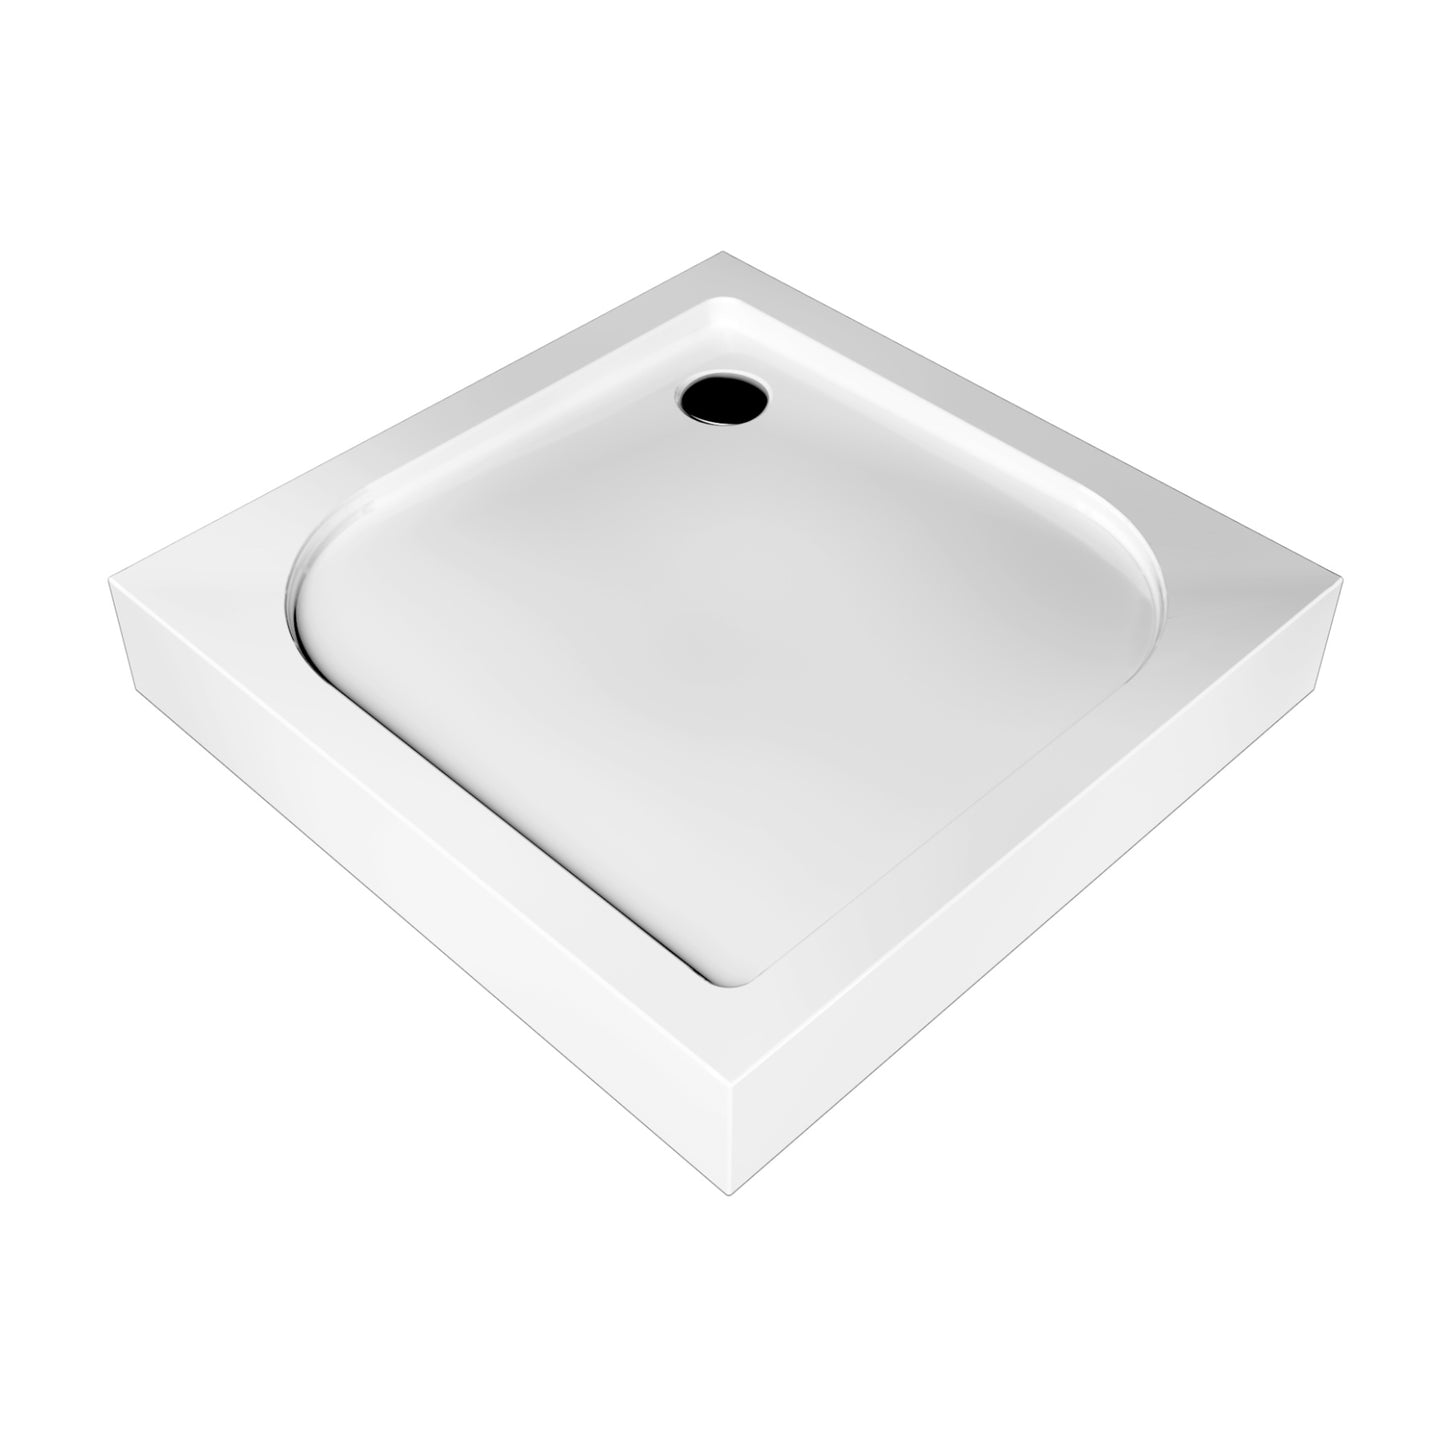 Square shower base compact TENOR